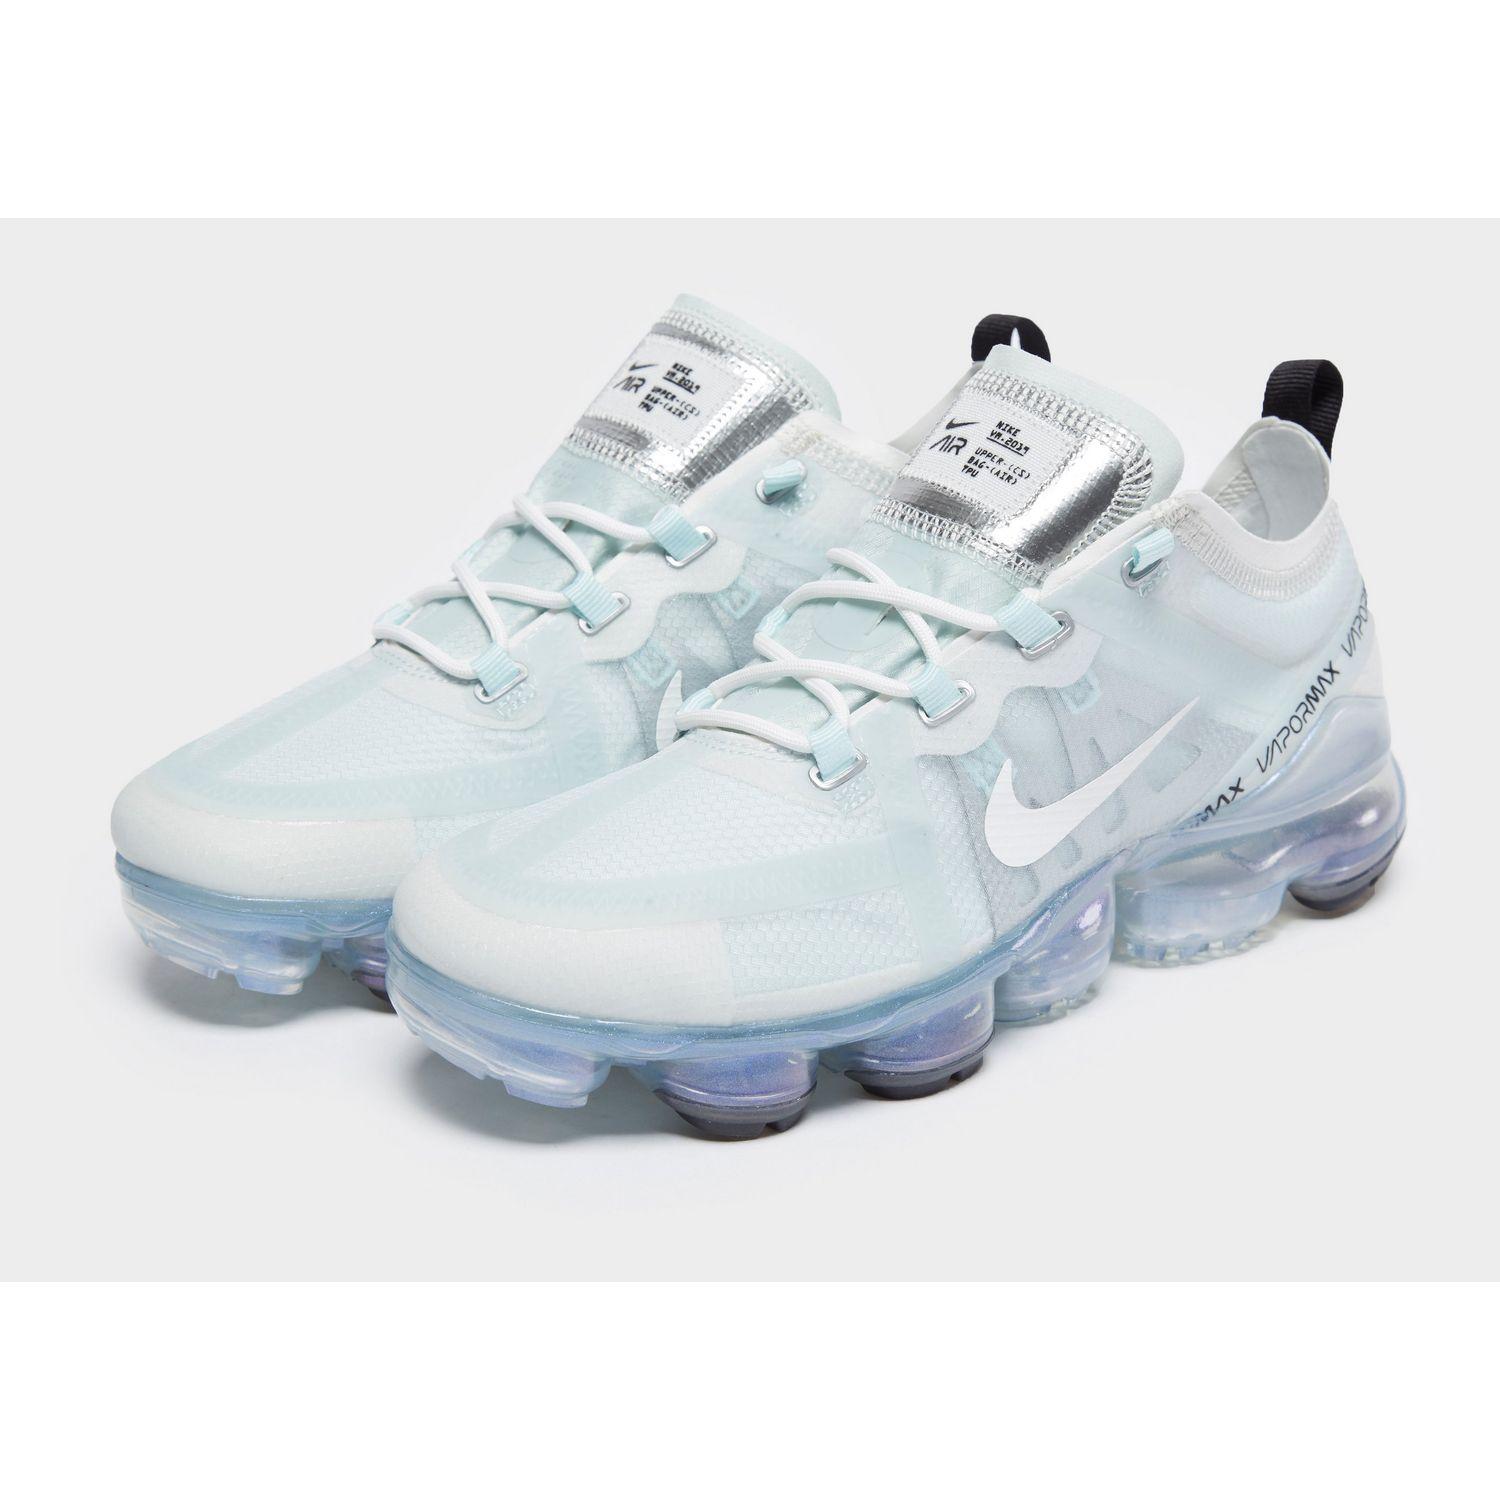 Nike Synthetic Air Vapormax 2019 in Light Blue/White (Blue) - Lyst